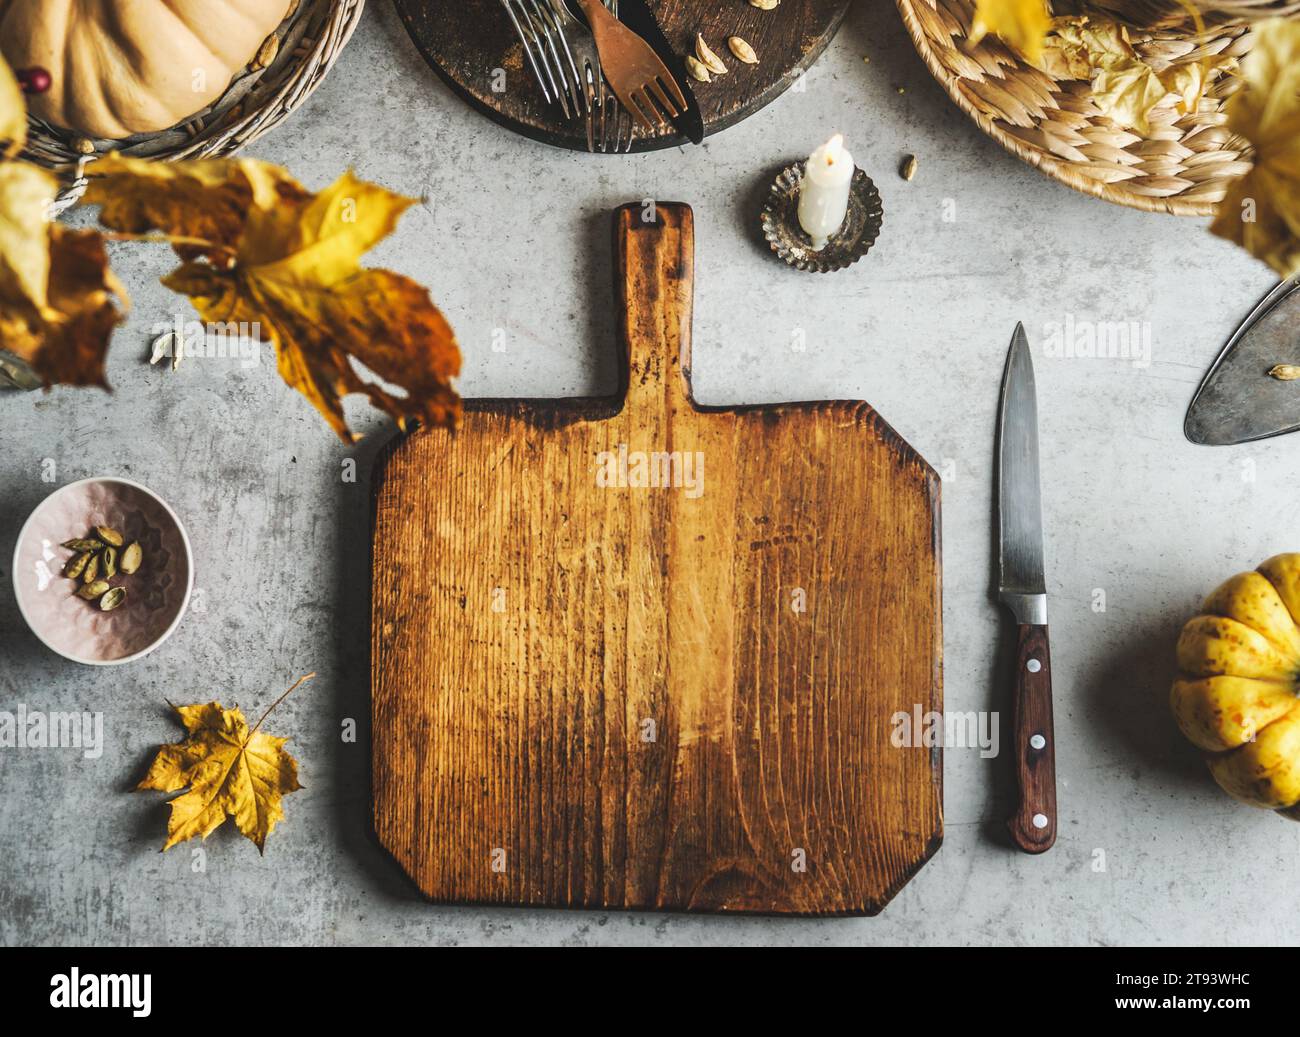 Food background with empty wooden cutting board, pumpkin, knife, autumn leaves and utensils at grey table. Cooking at home with seasonal ingredients. Stock Photo